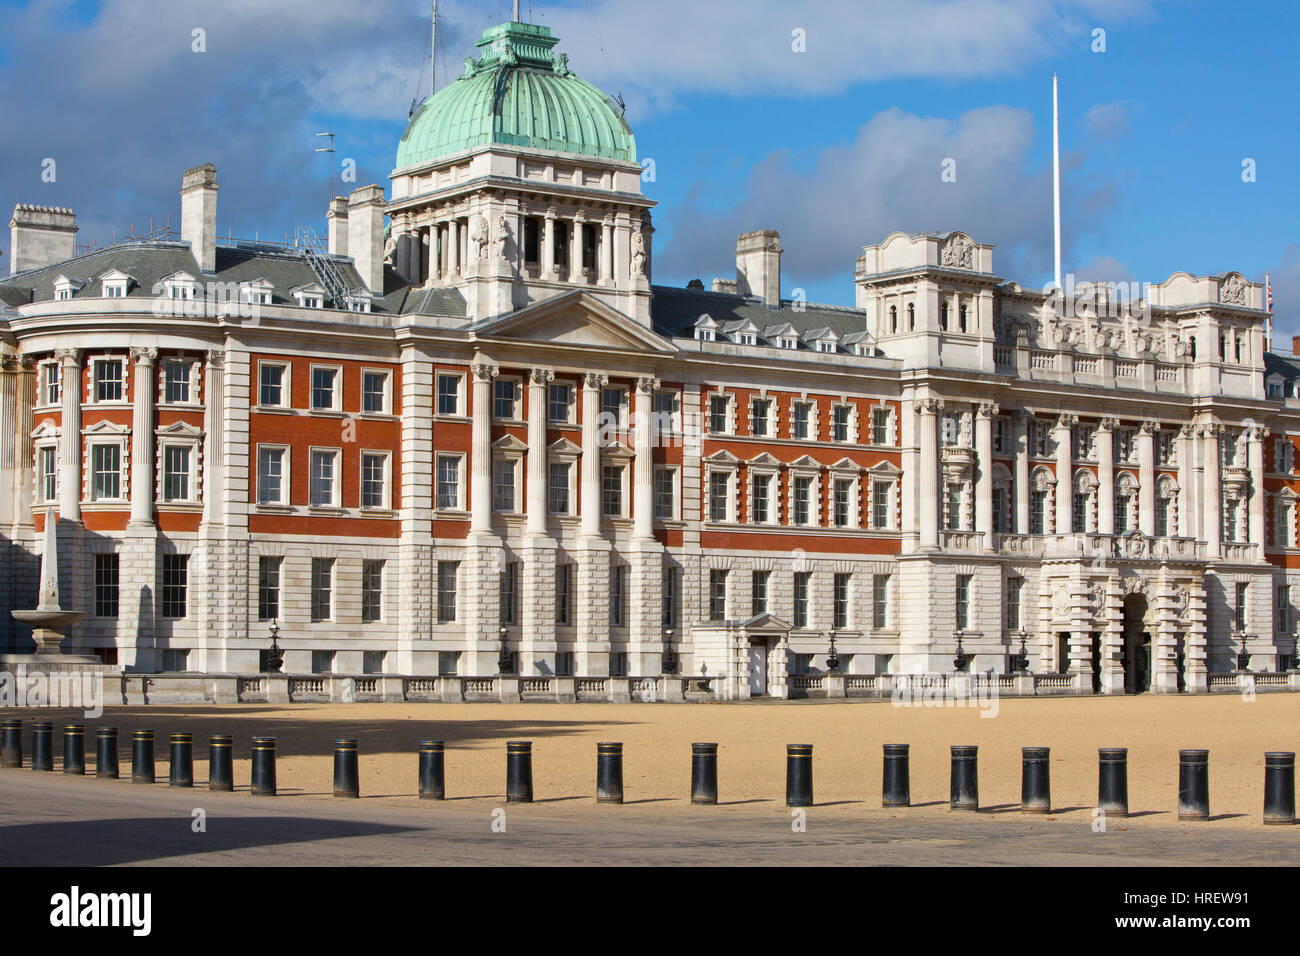 The Admiralty building in London Stock Photo